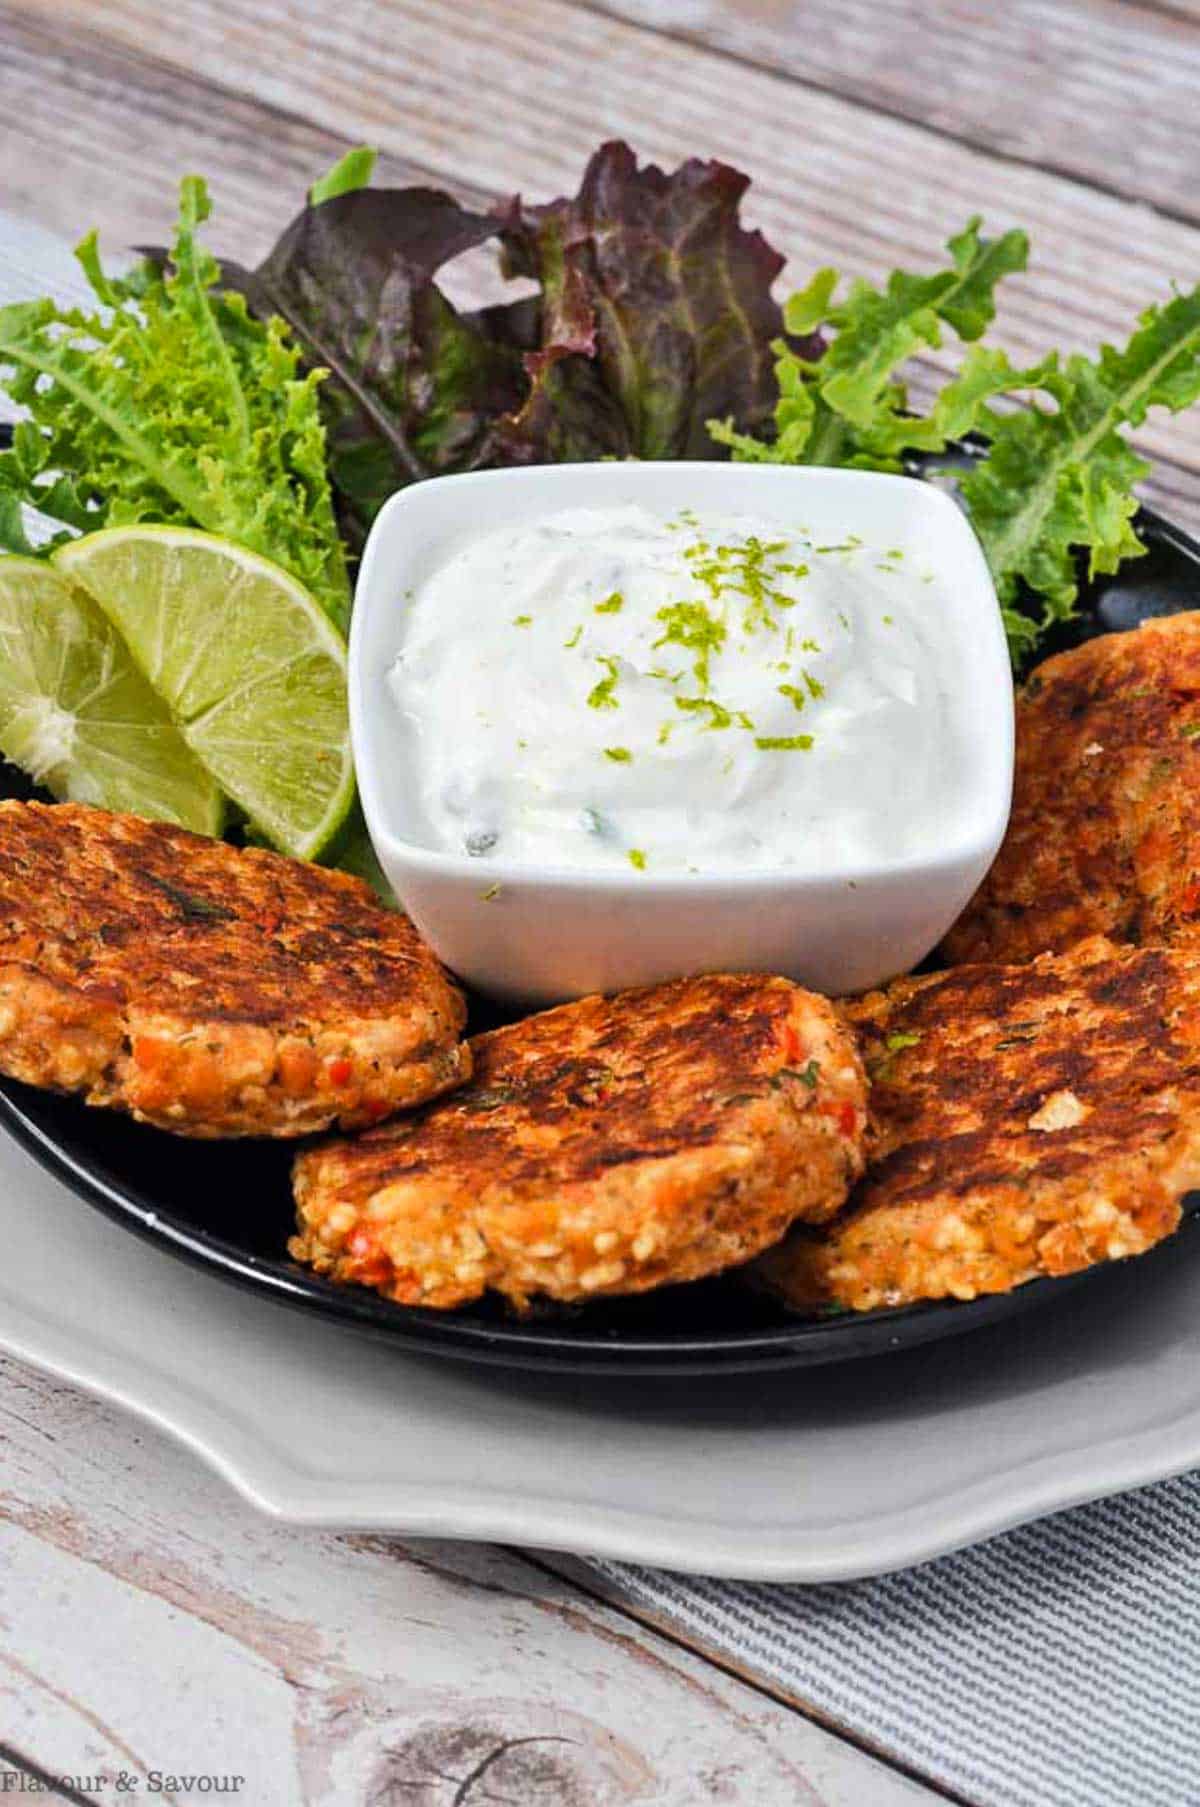 Baked Salmon Patties on a plate with Lime Dip and fresh greens.